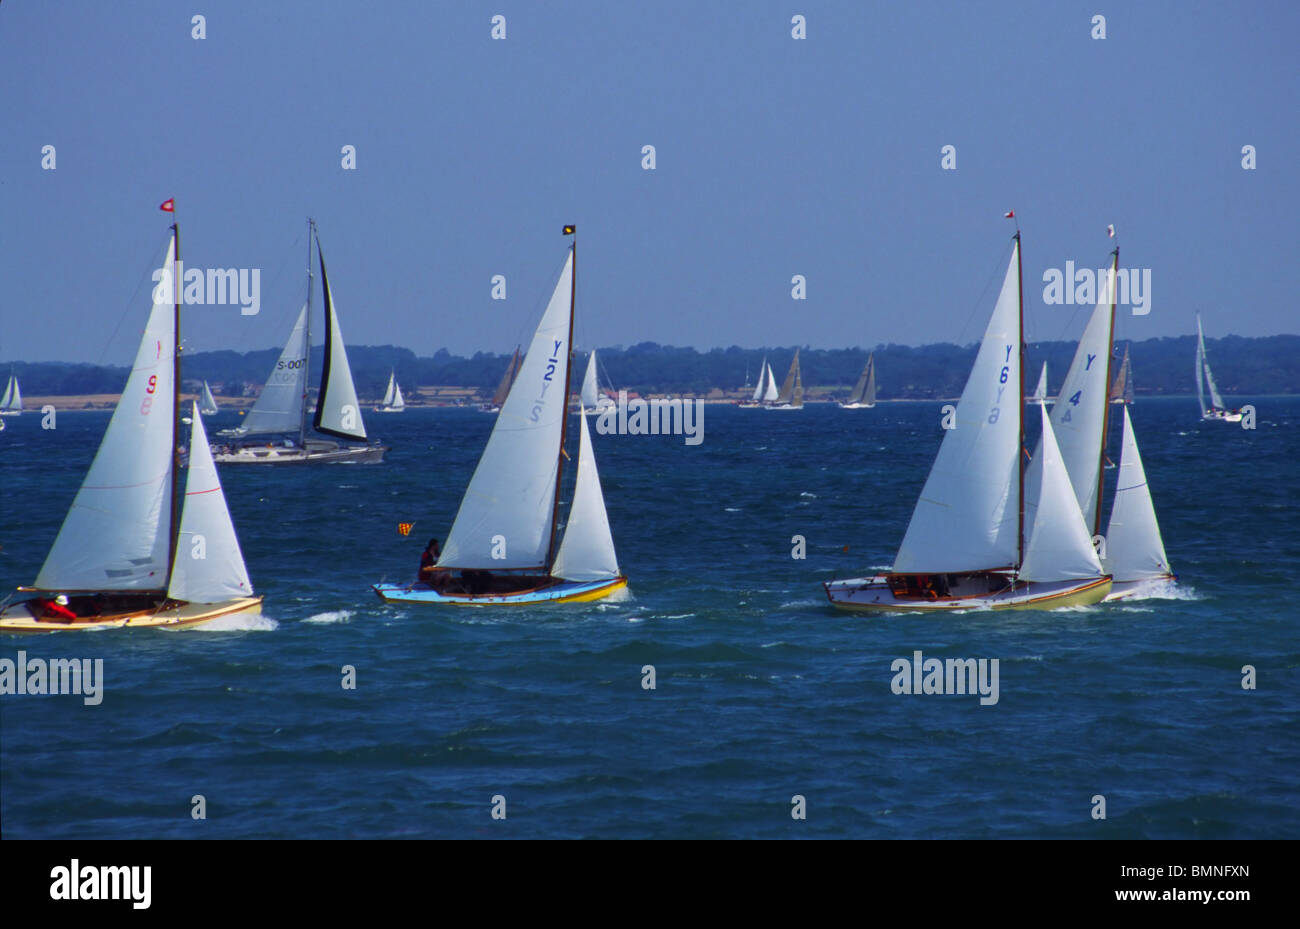 Hampshire, Sailing Dinghies In Solent Stock Photo